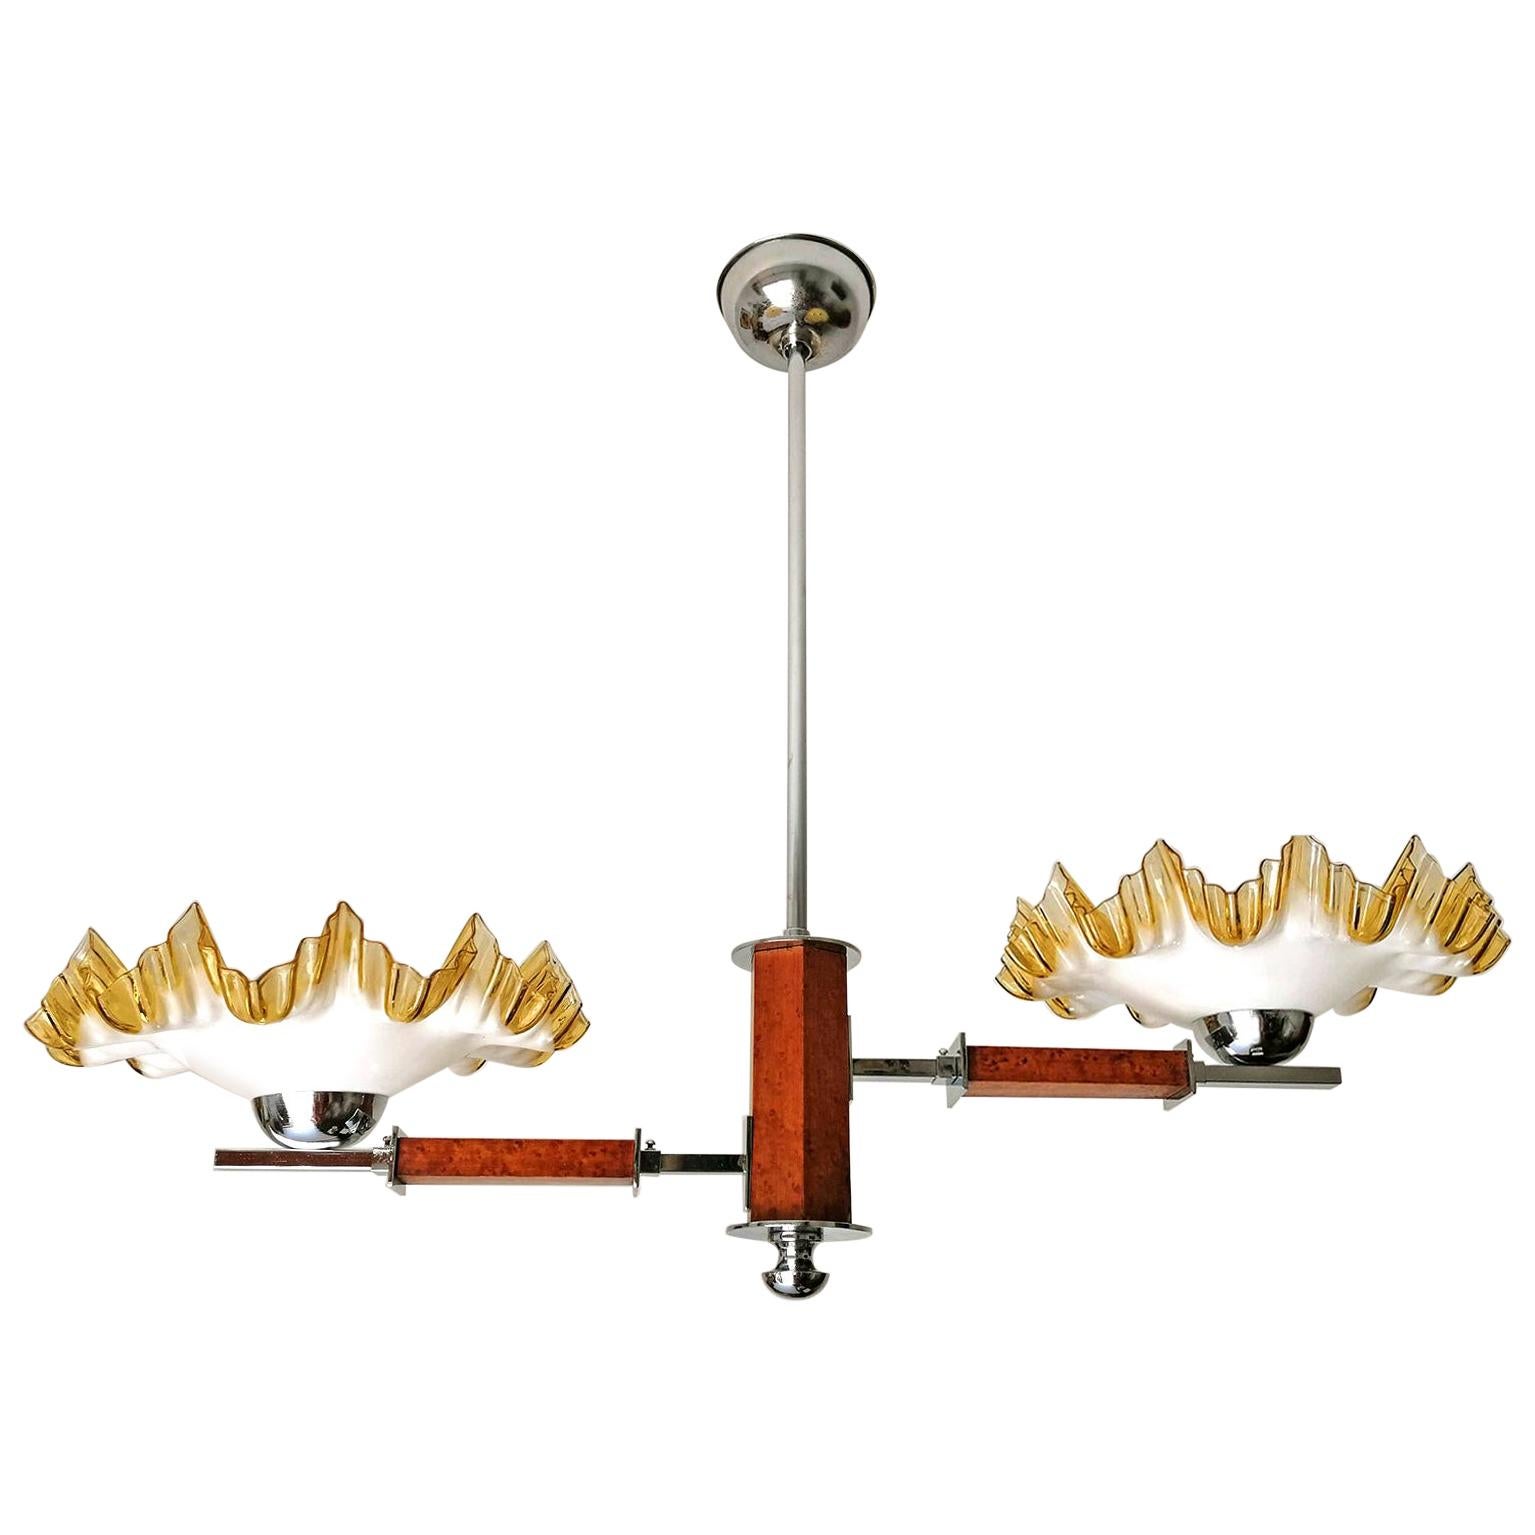 French Art Deco Opaline Ruffled Amber Art Glass Shades Wood & Chrome Chandelier For Sale